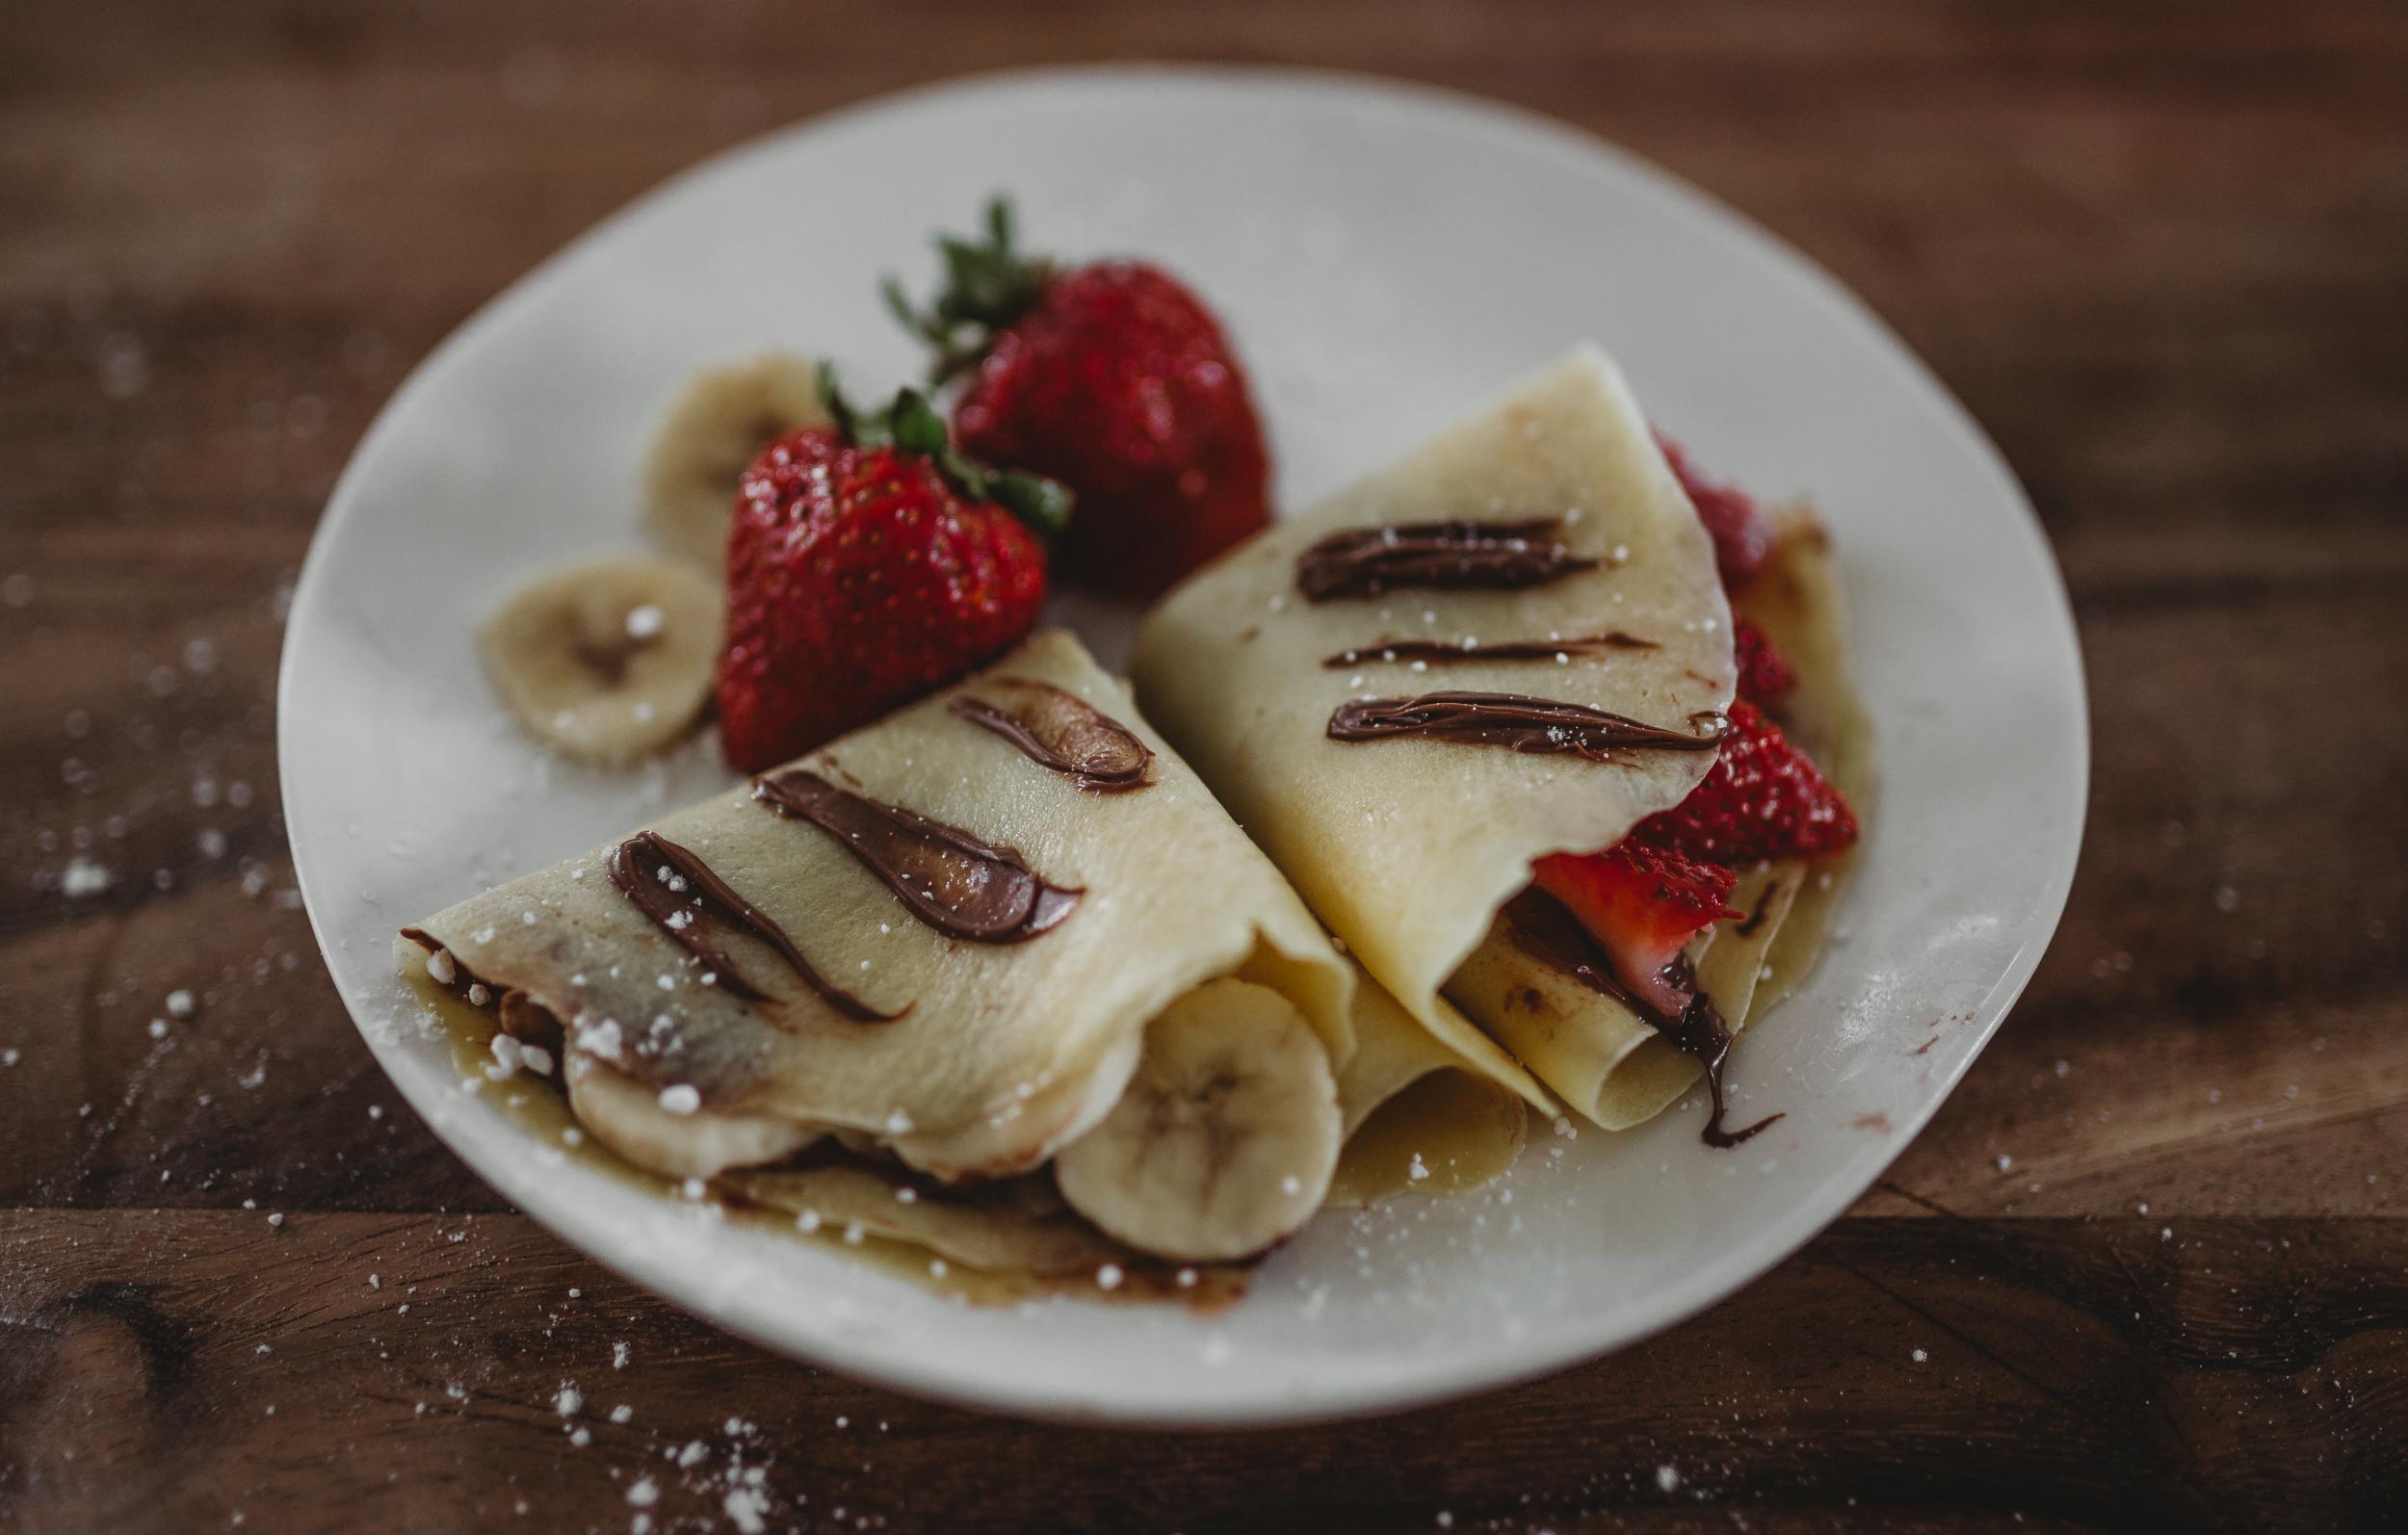 Breckenridge, CO Crêpe Cafe Offers Sweet French Pancakes With Chocolate & Fruit